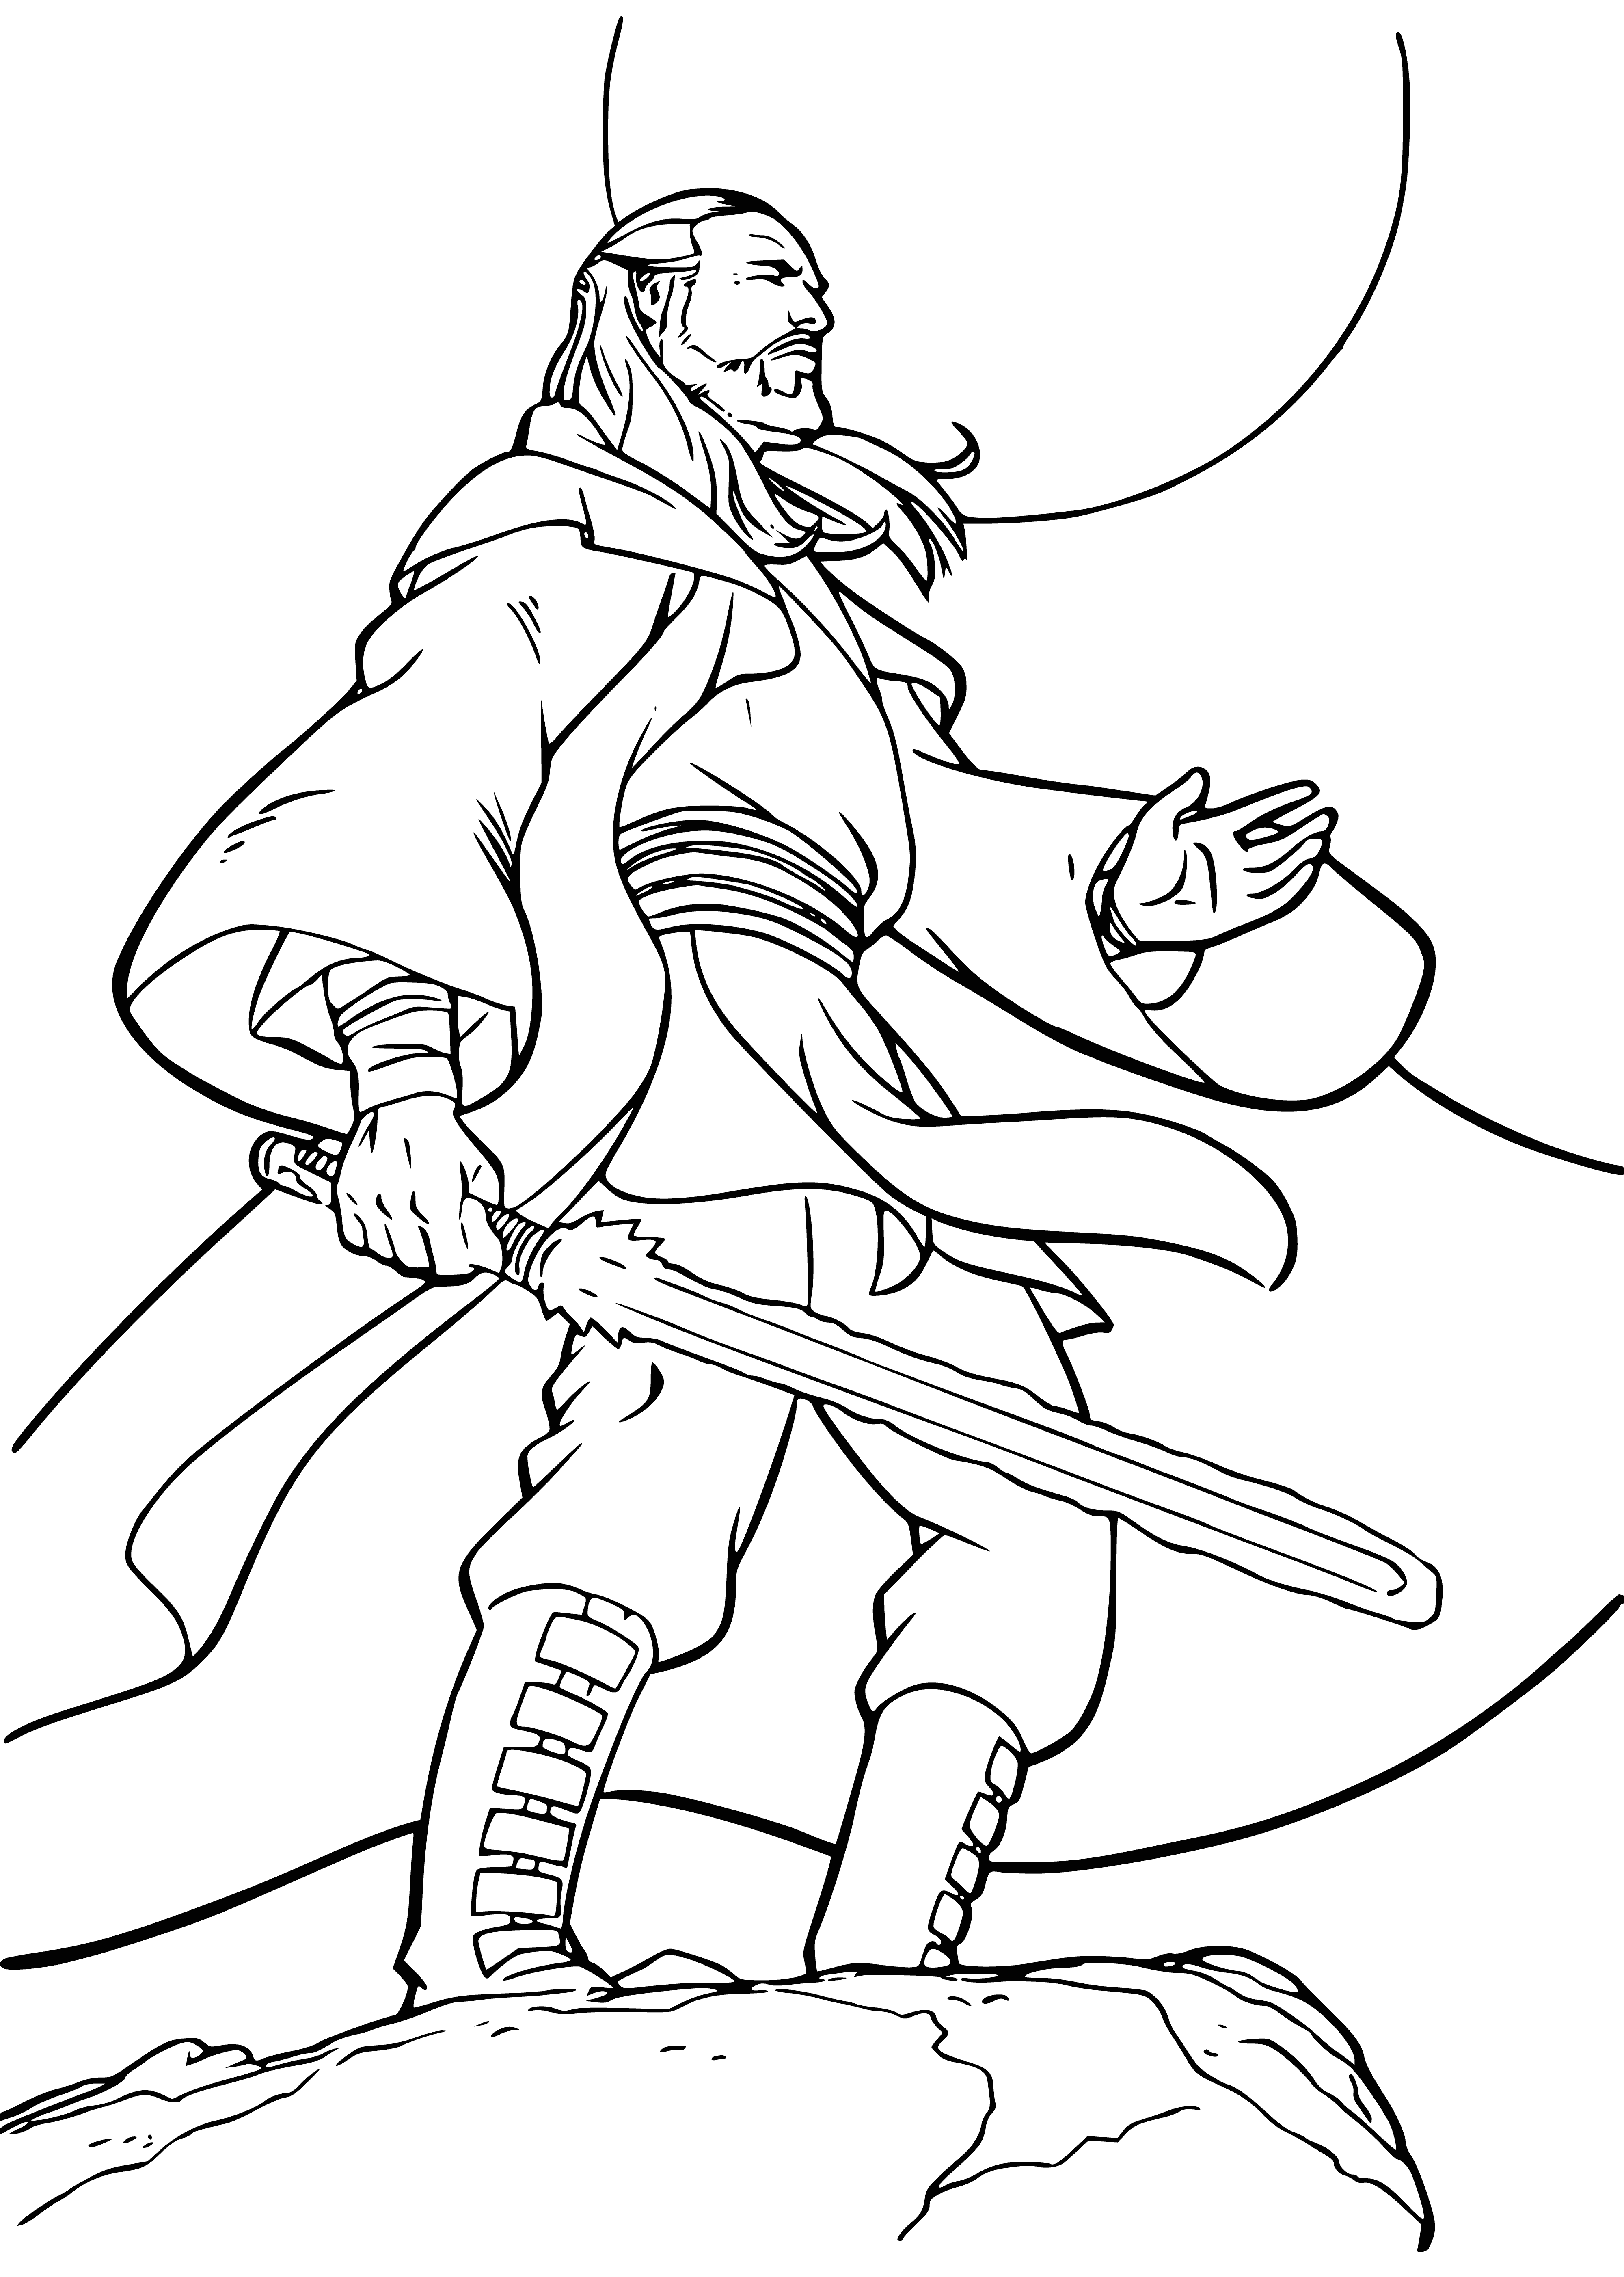 coloring page: A man with a lightsaber stands before a spaceship; he's wearing a brown robe & has long, dark hair & a beard.